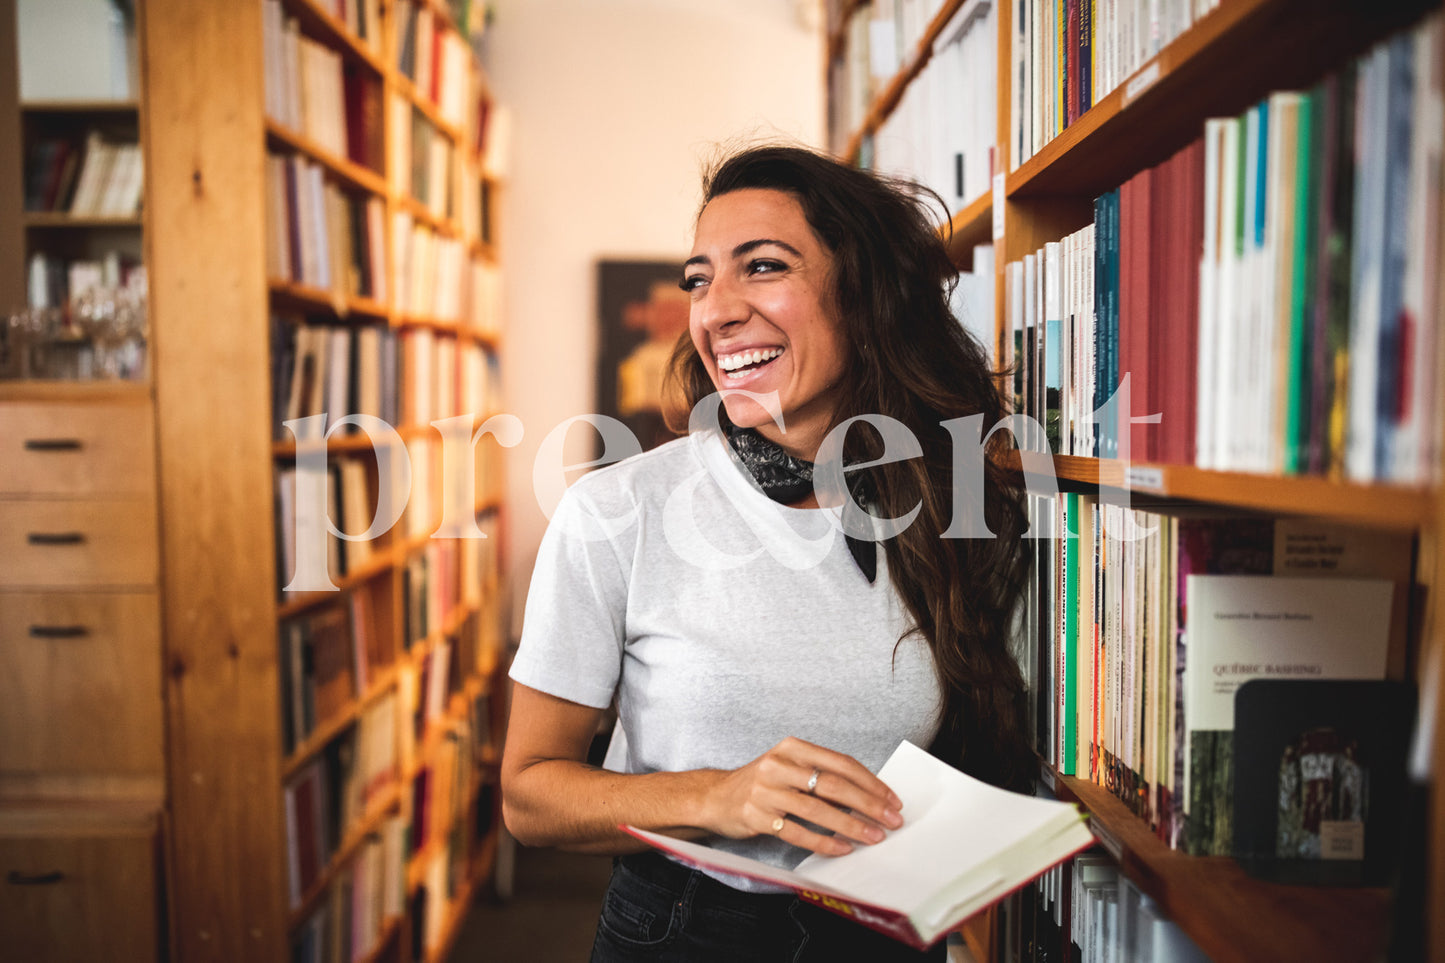 Smiling person in a library, holding a book